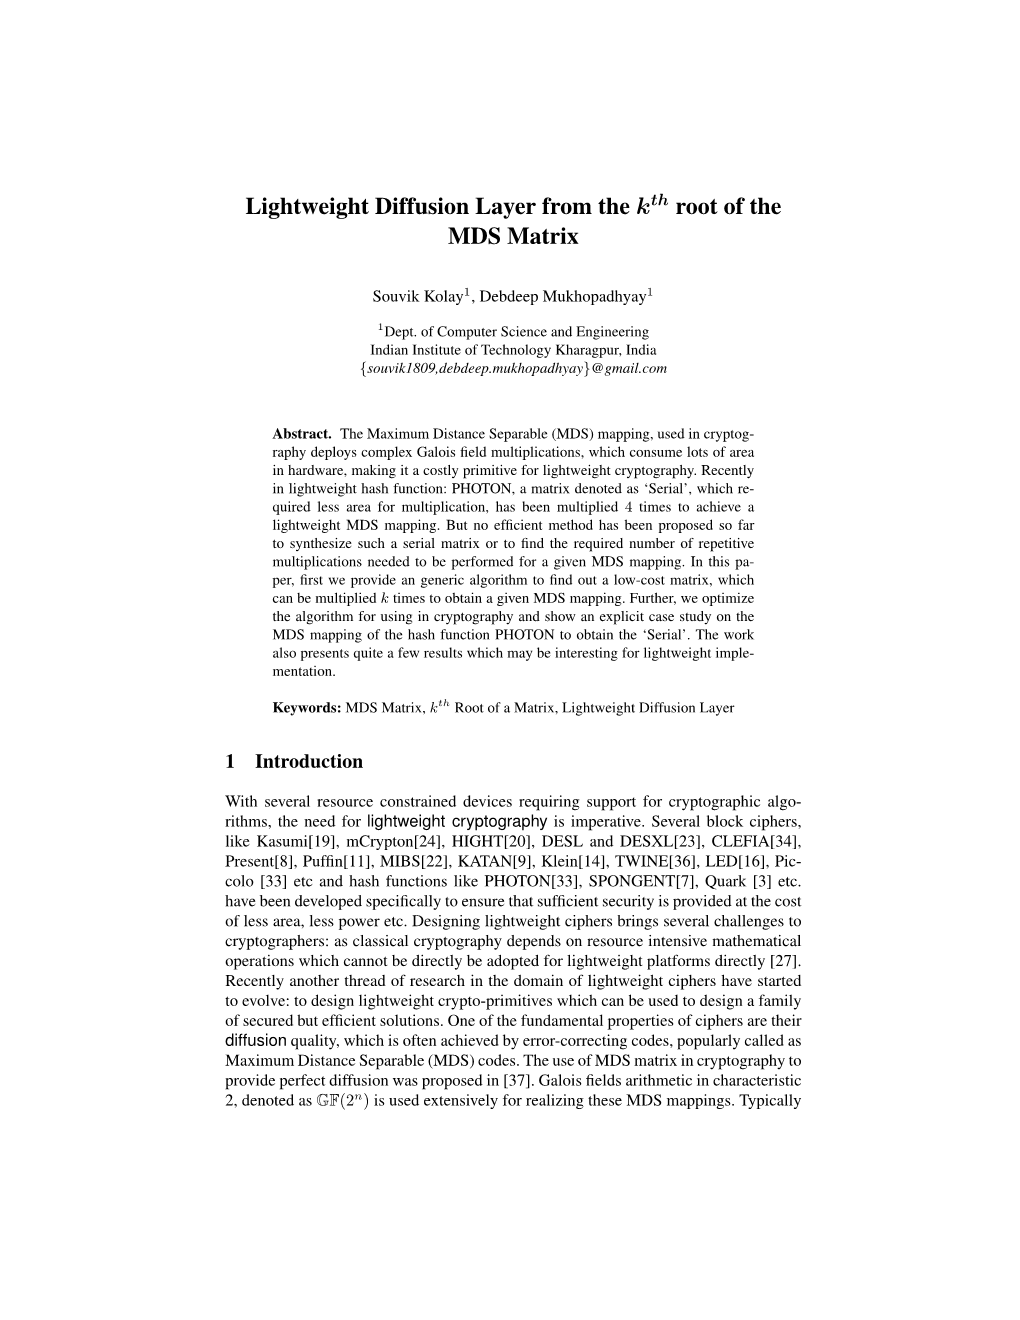 Lightweight Diffusion Layer from the Kth Root of the MDS Matrix